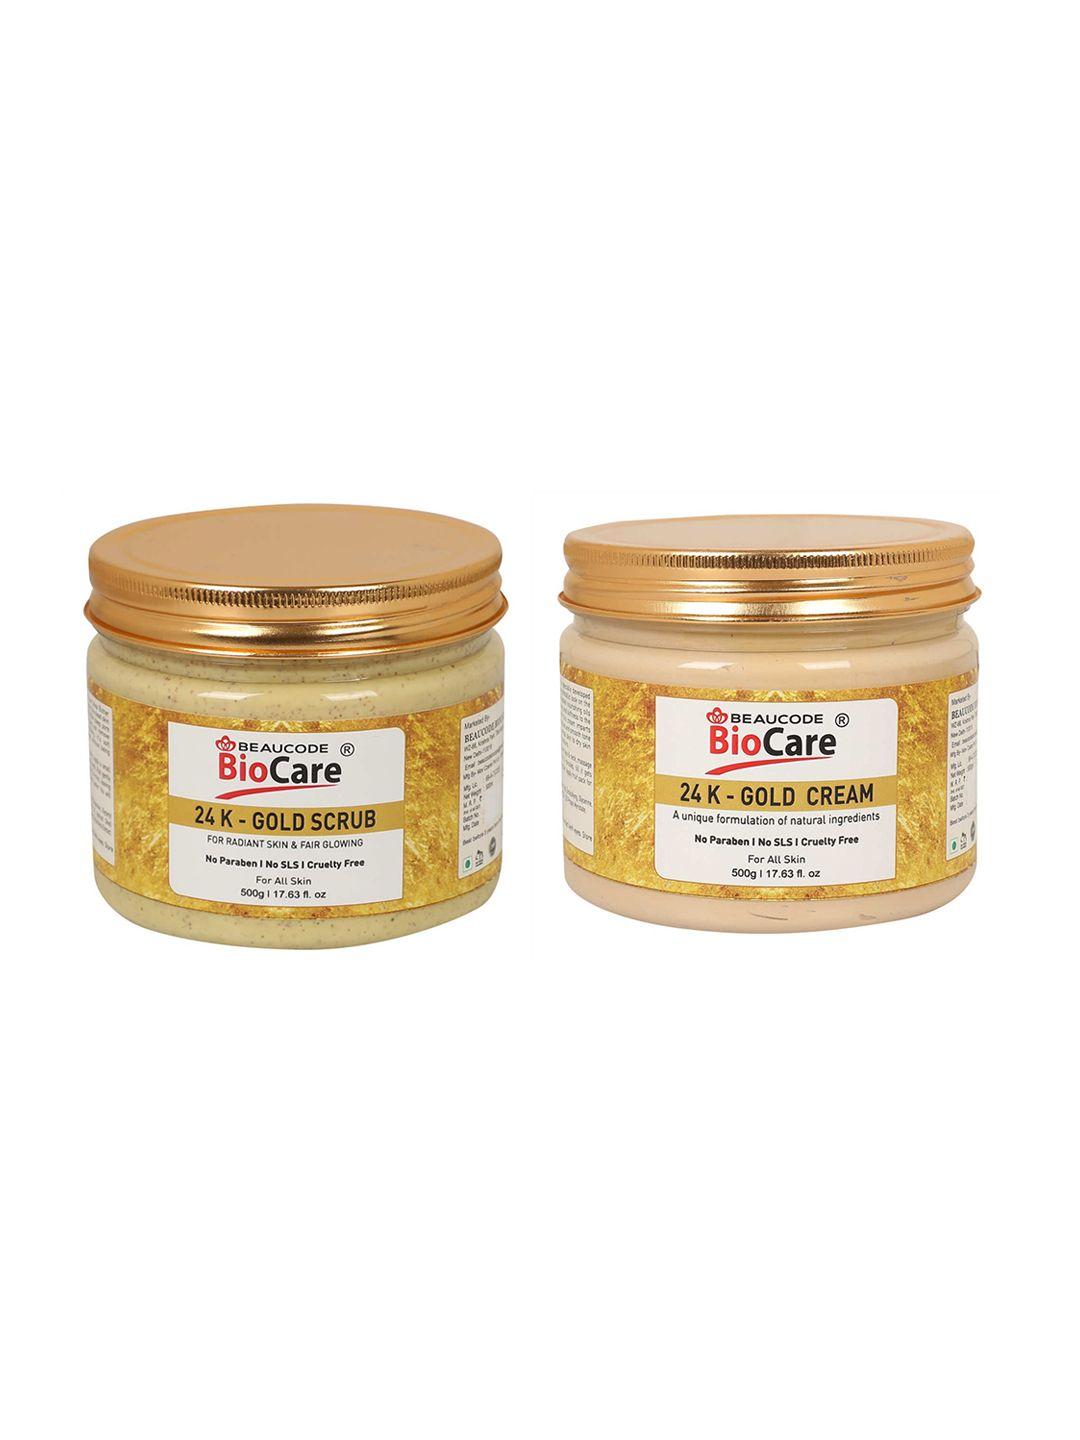 beaucode biocare set of 2 24k gold face and body scrub and cream 1kg